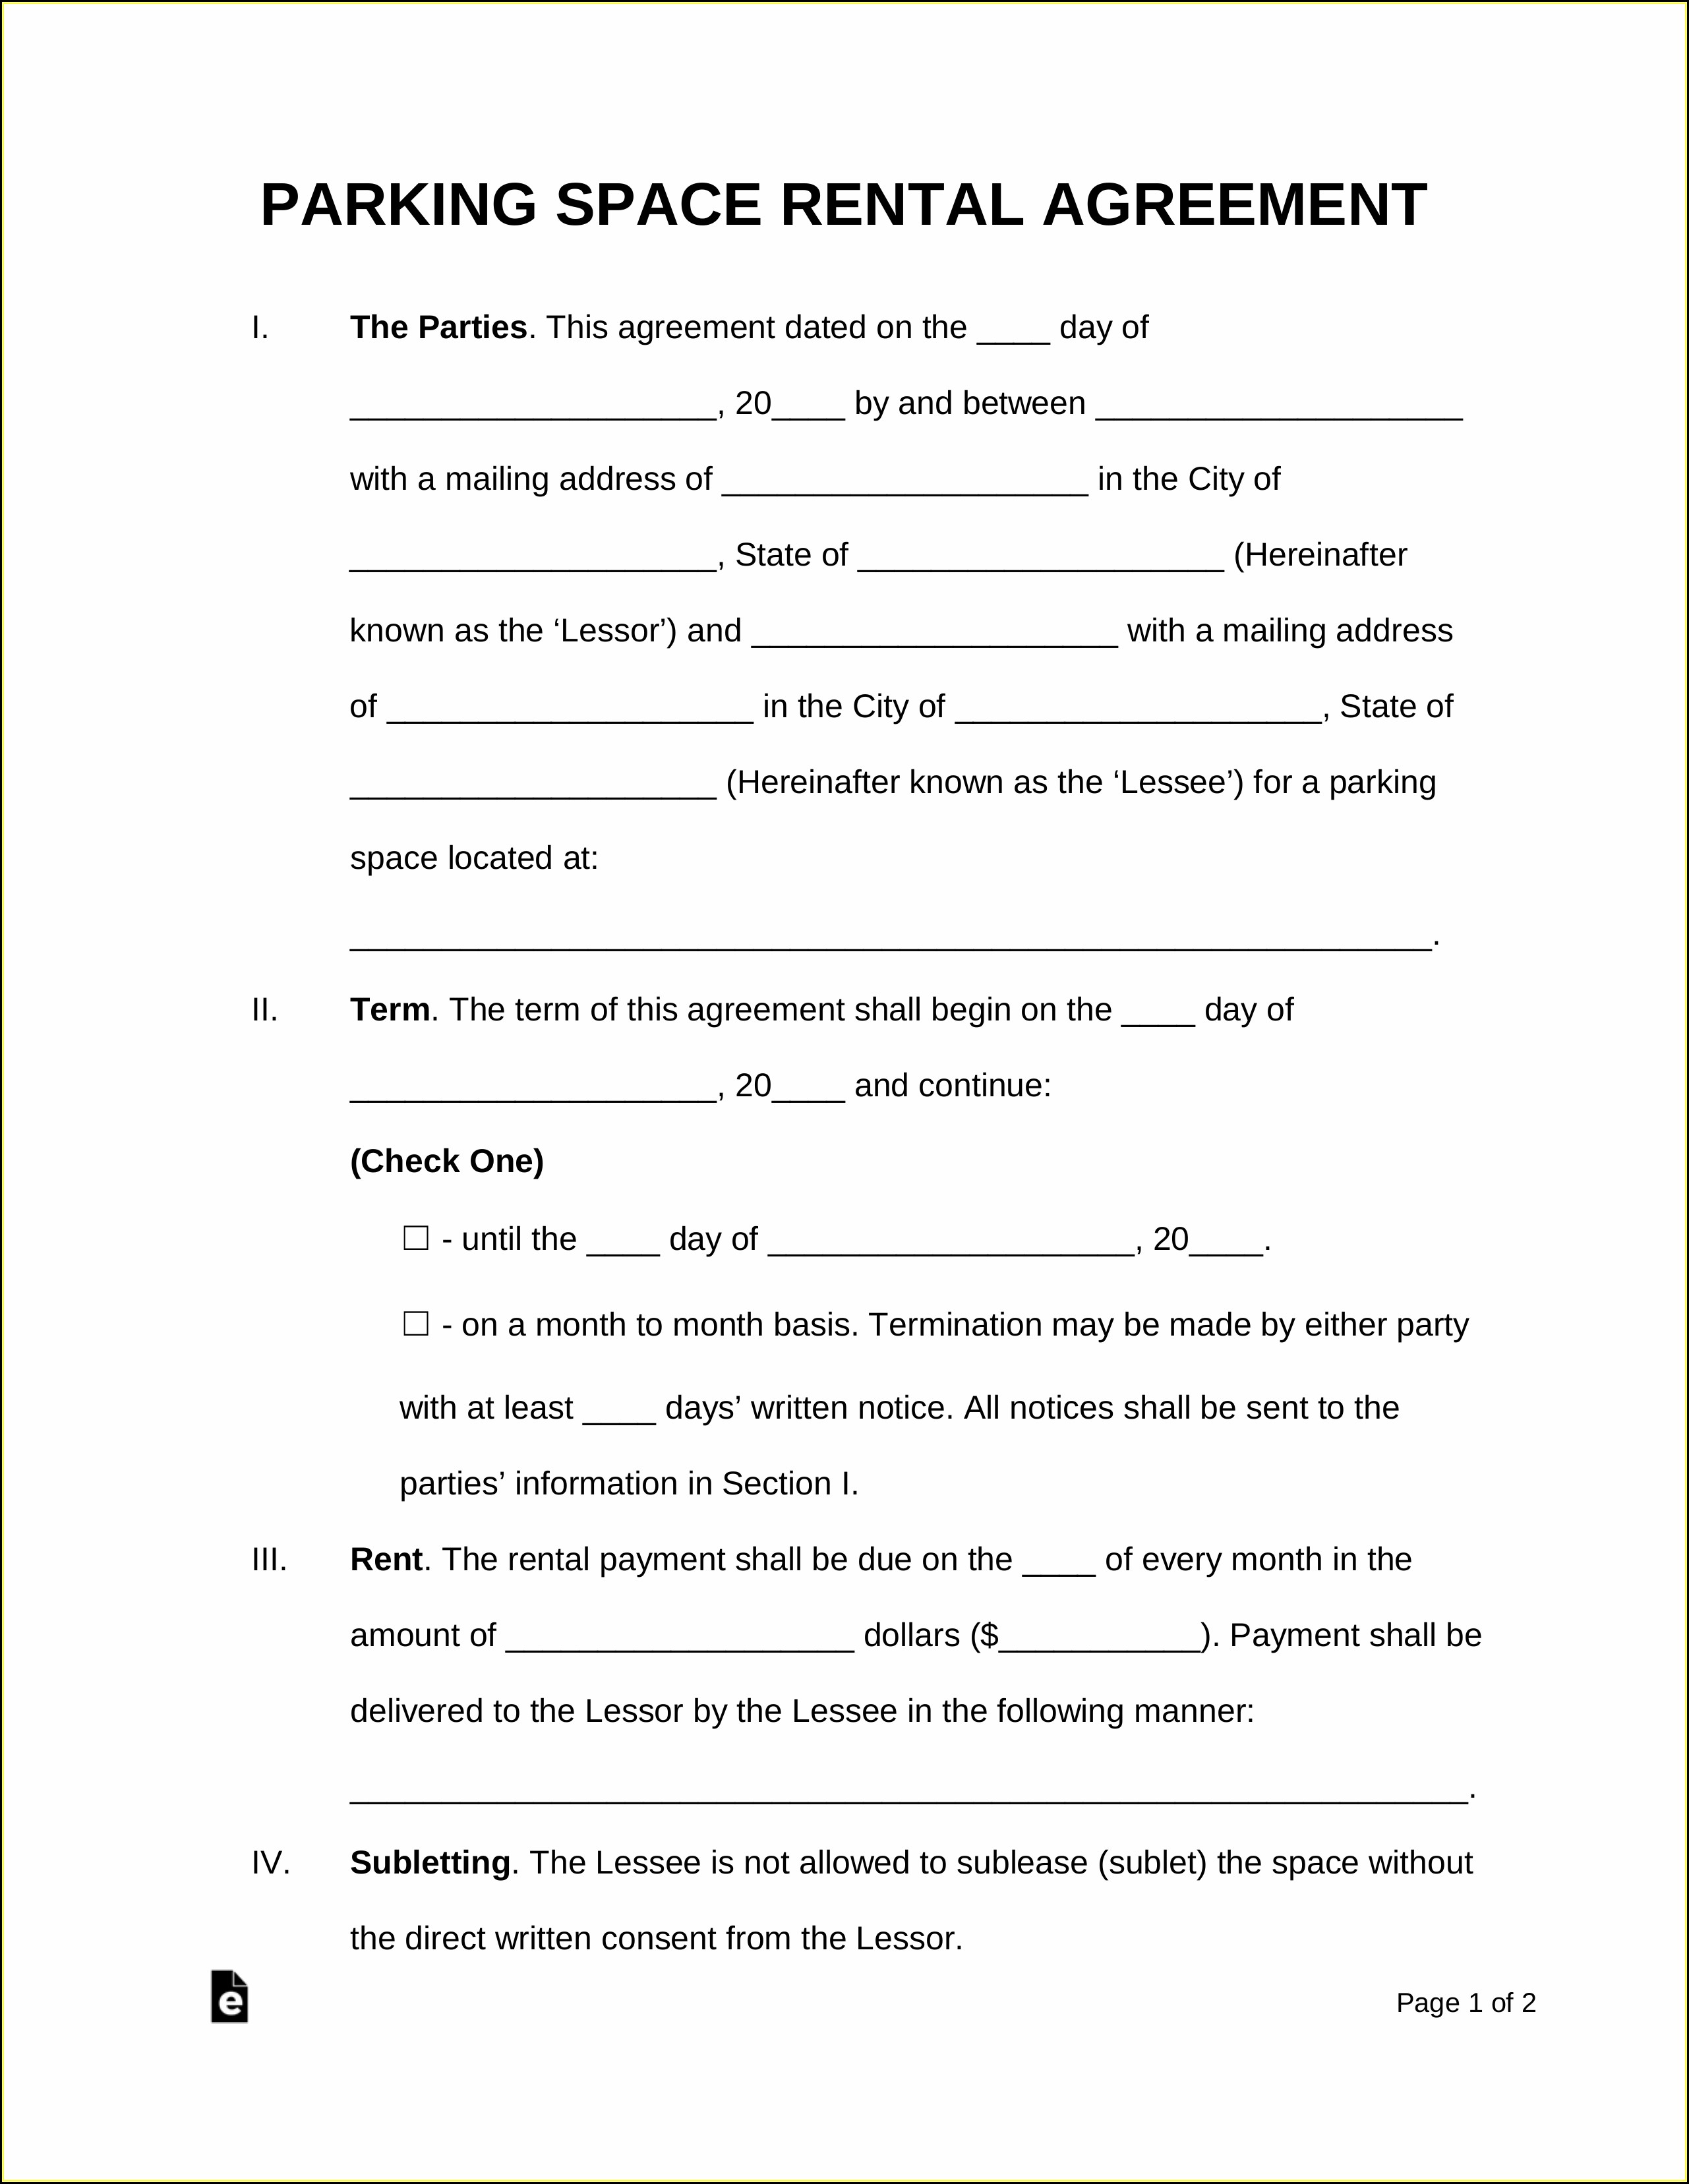 parking-space-lease-agreement-template-philippines-template-2-resume-examples-1zv8p4nv3x